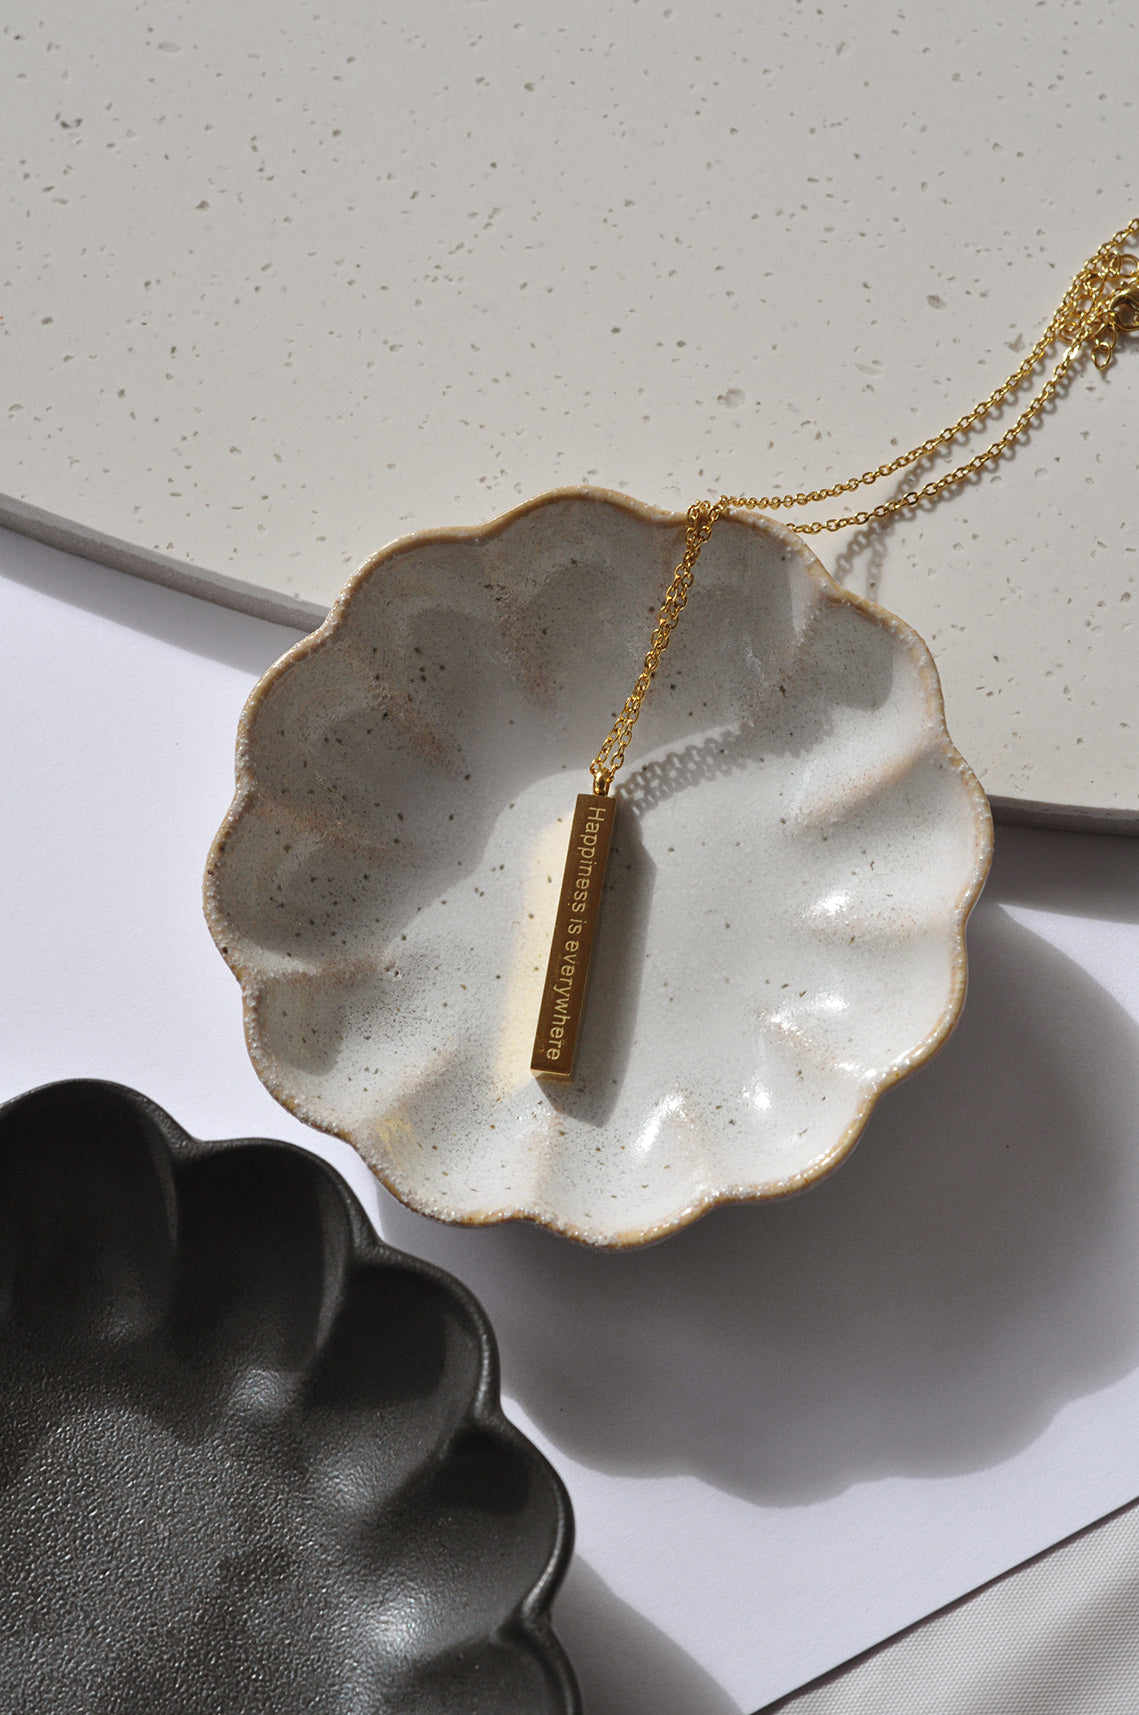 HAPPINESS IS EVERYWHERE | Necklace in gold